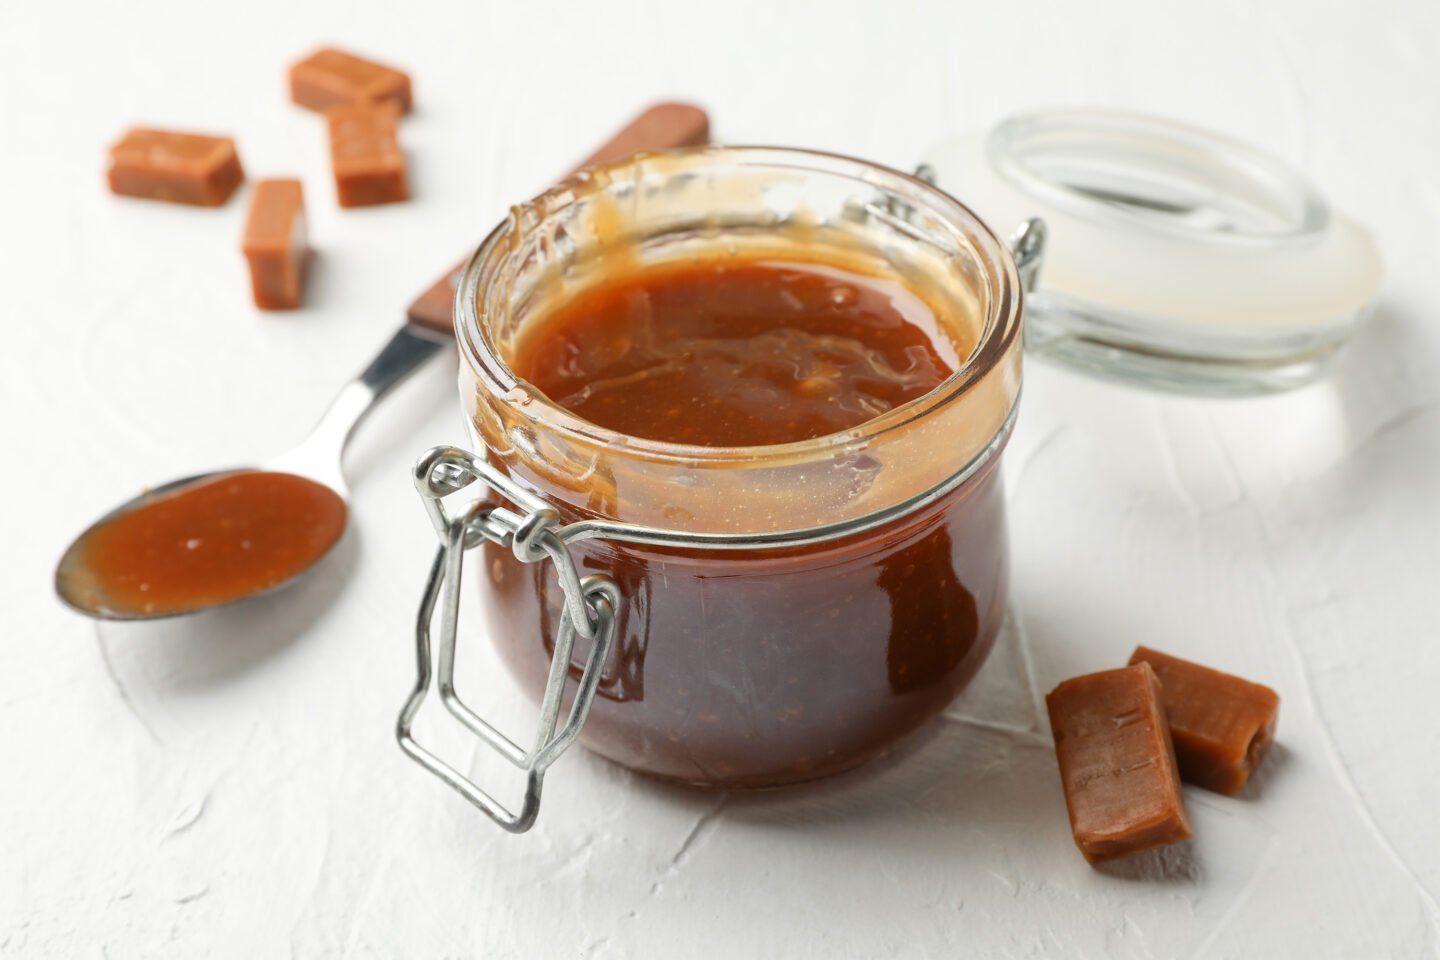 salted caramel jar and chewy candies